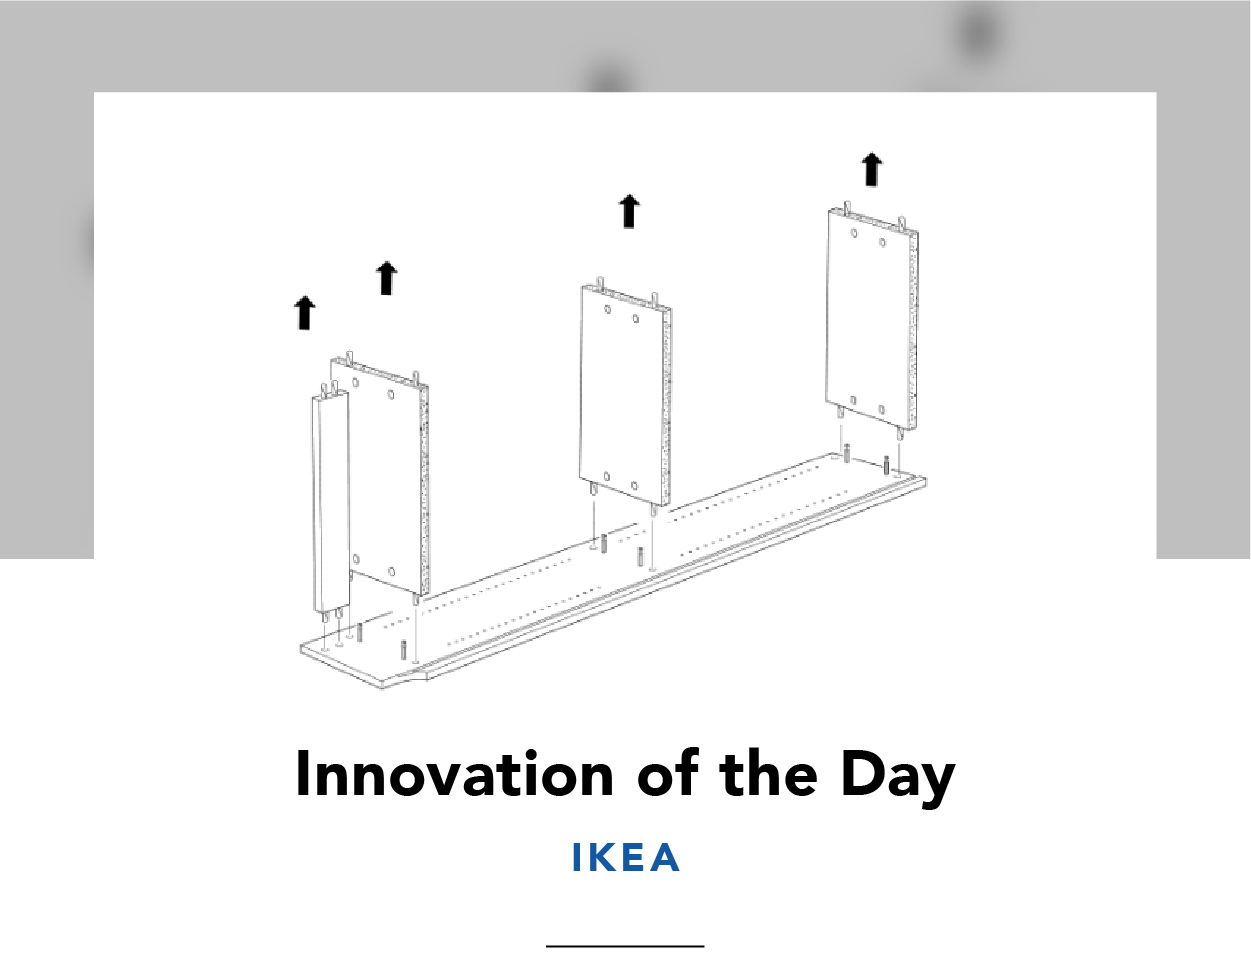 Line drawing showing how to remove shelves from an IKEA bookcase